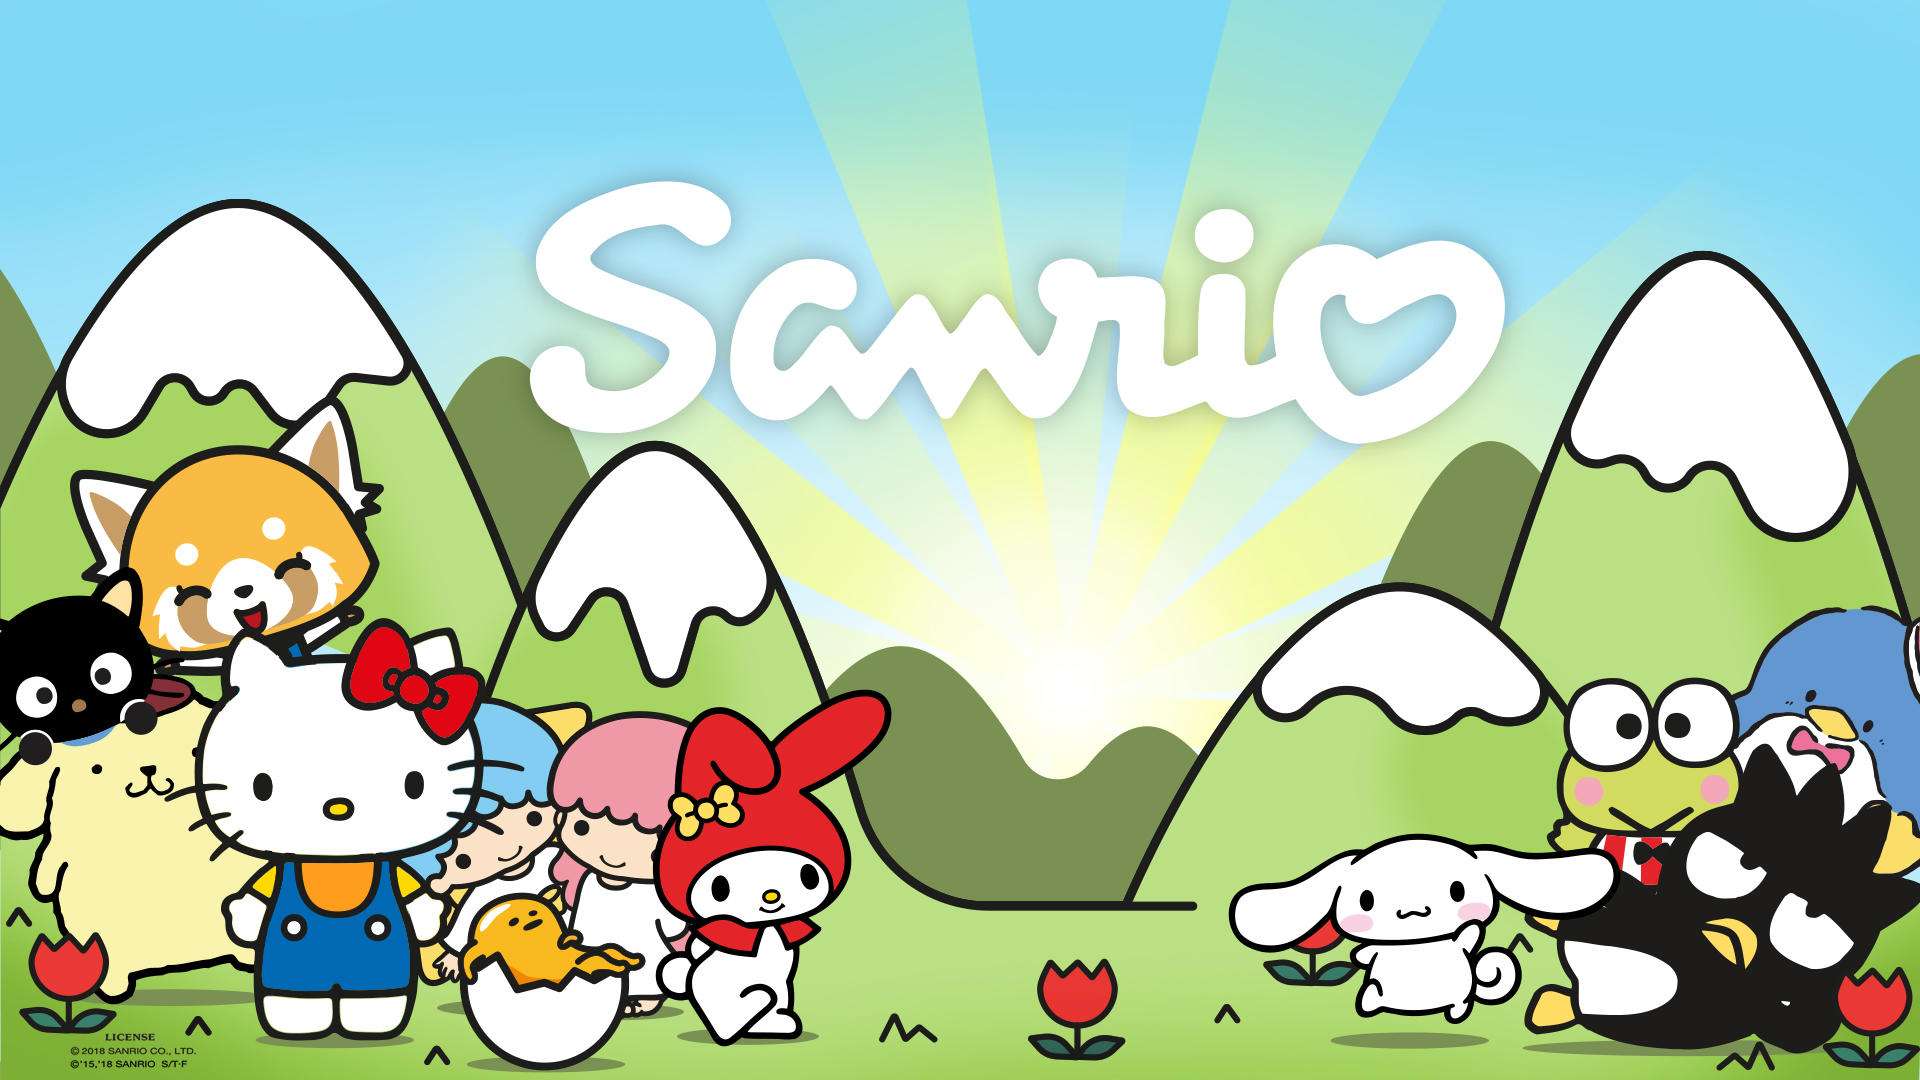 Bublar has partnered with Sanrio, the global brand behind Hello Kitty